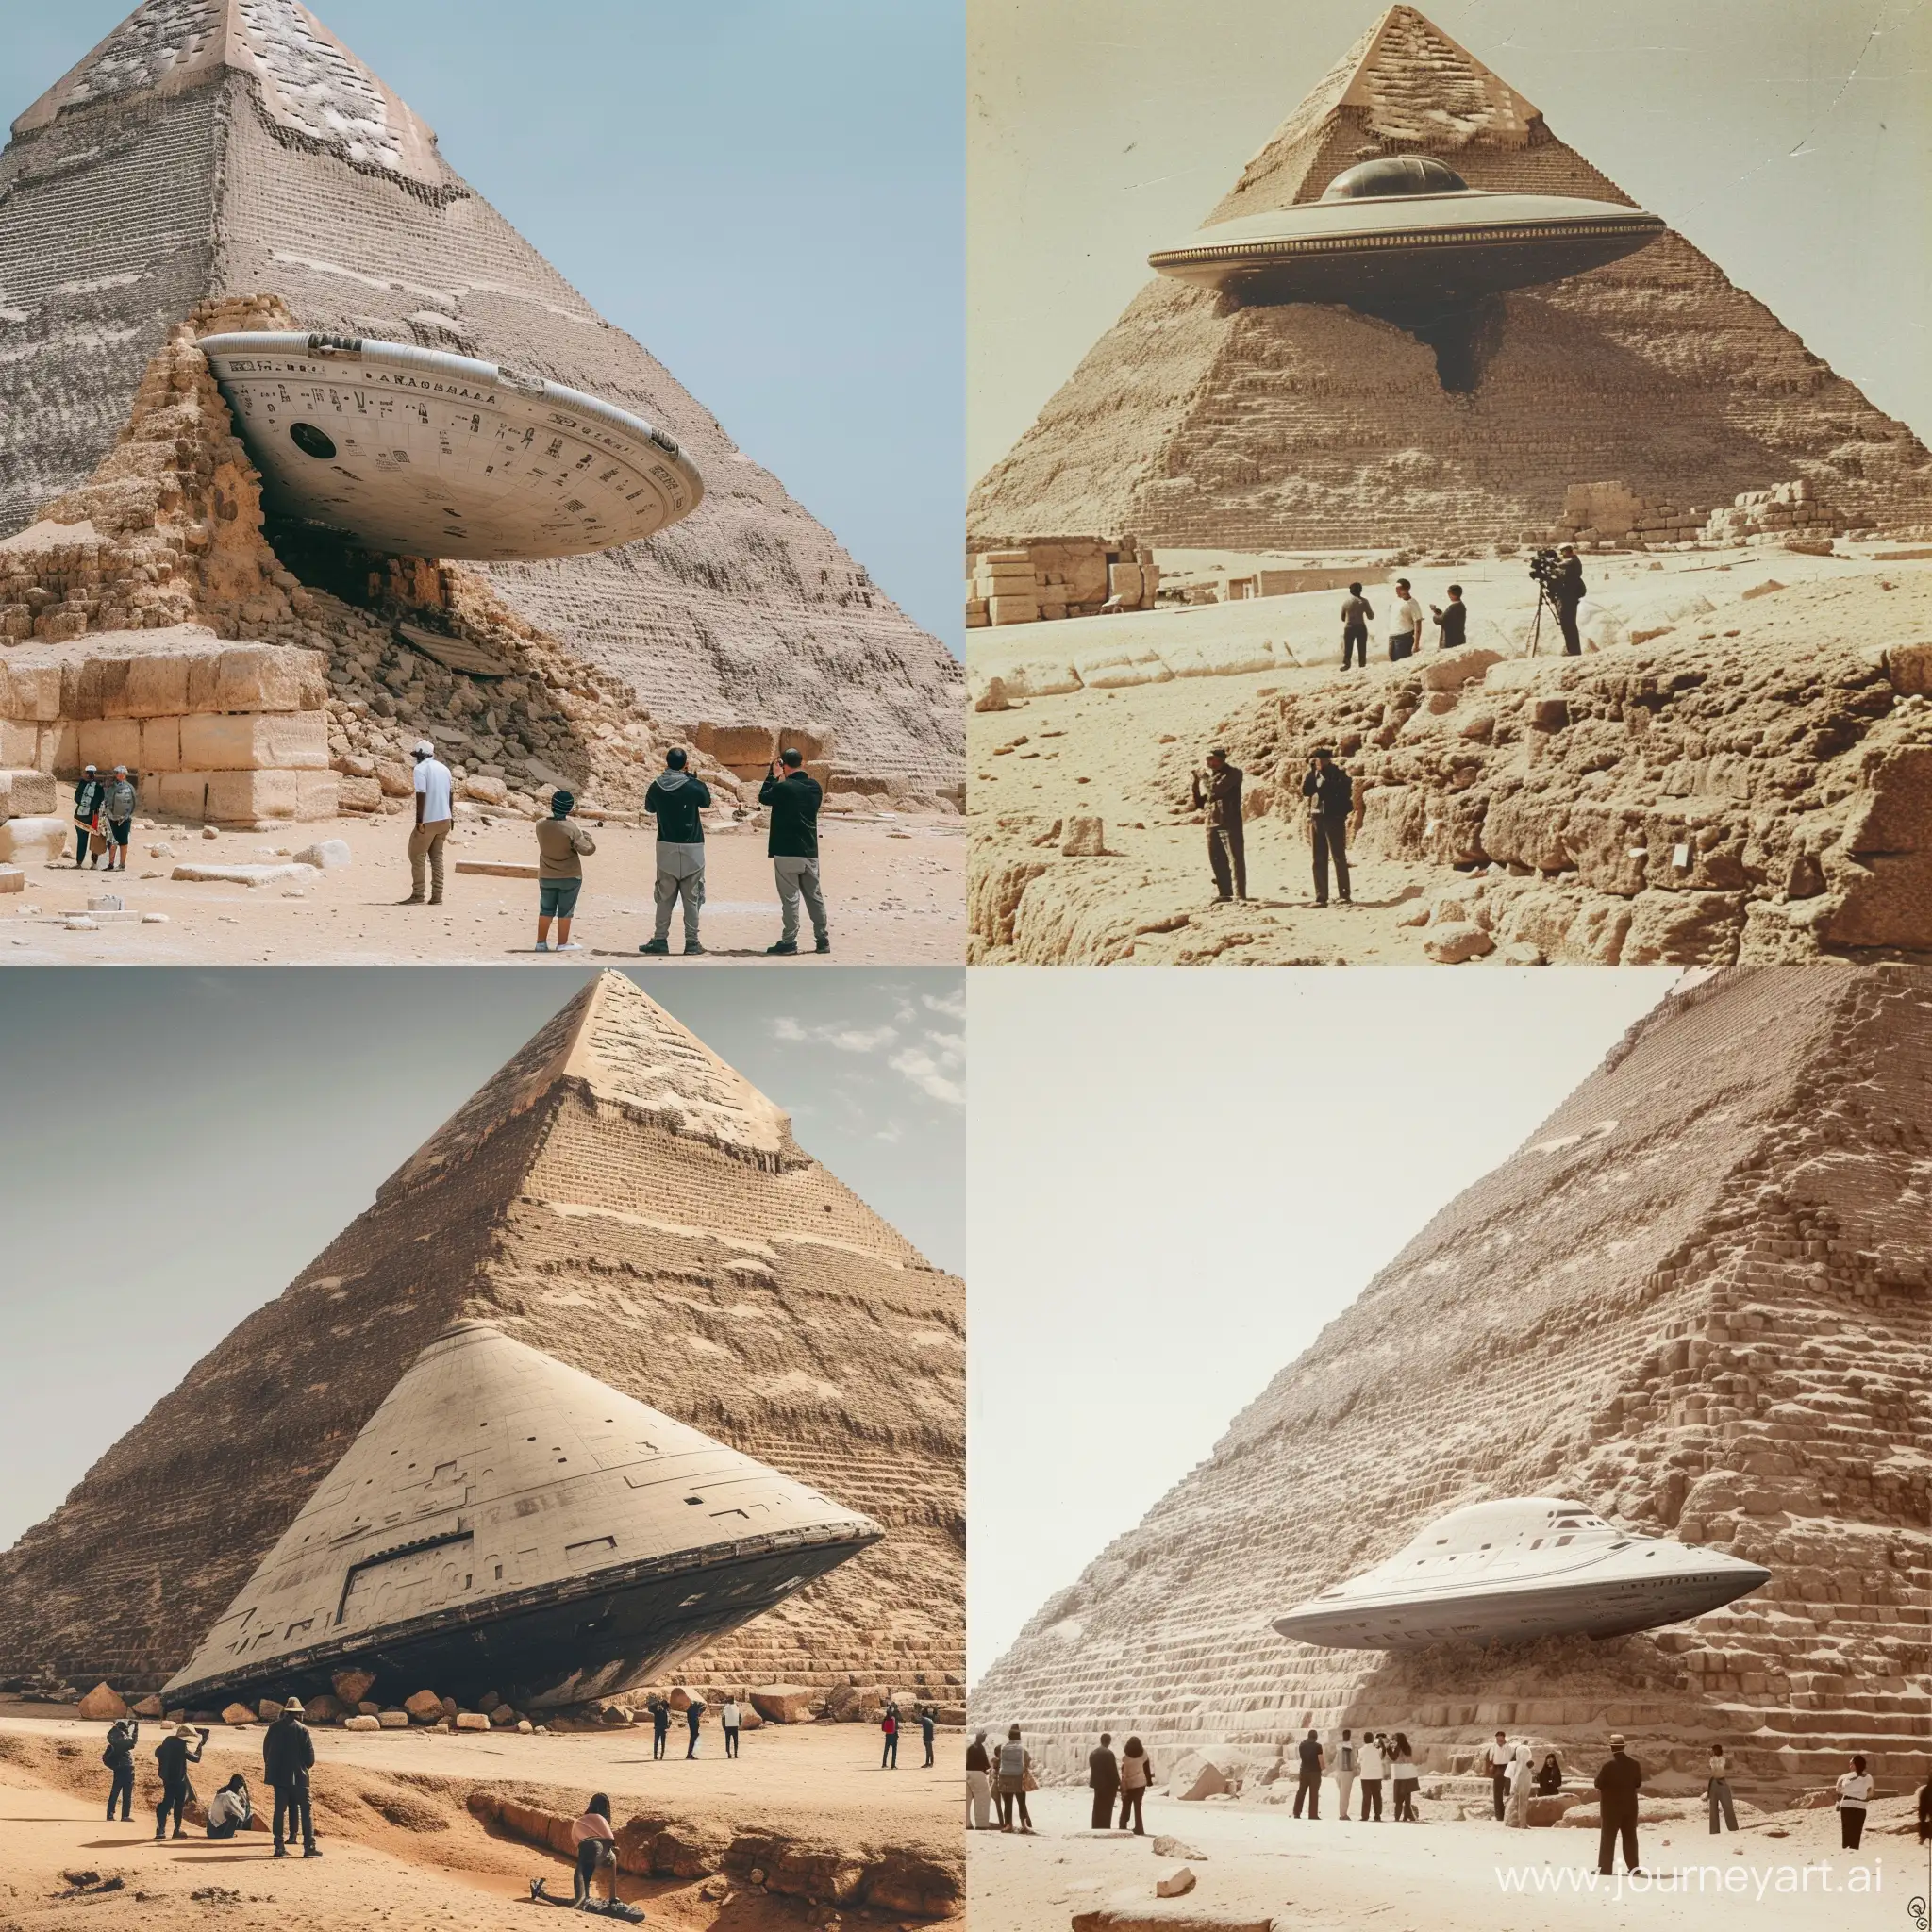 Khufu-Pyramid-HalfCollapse-with-Extraterrestrial-Ship